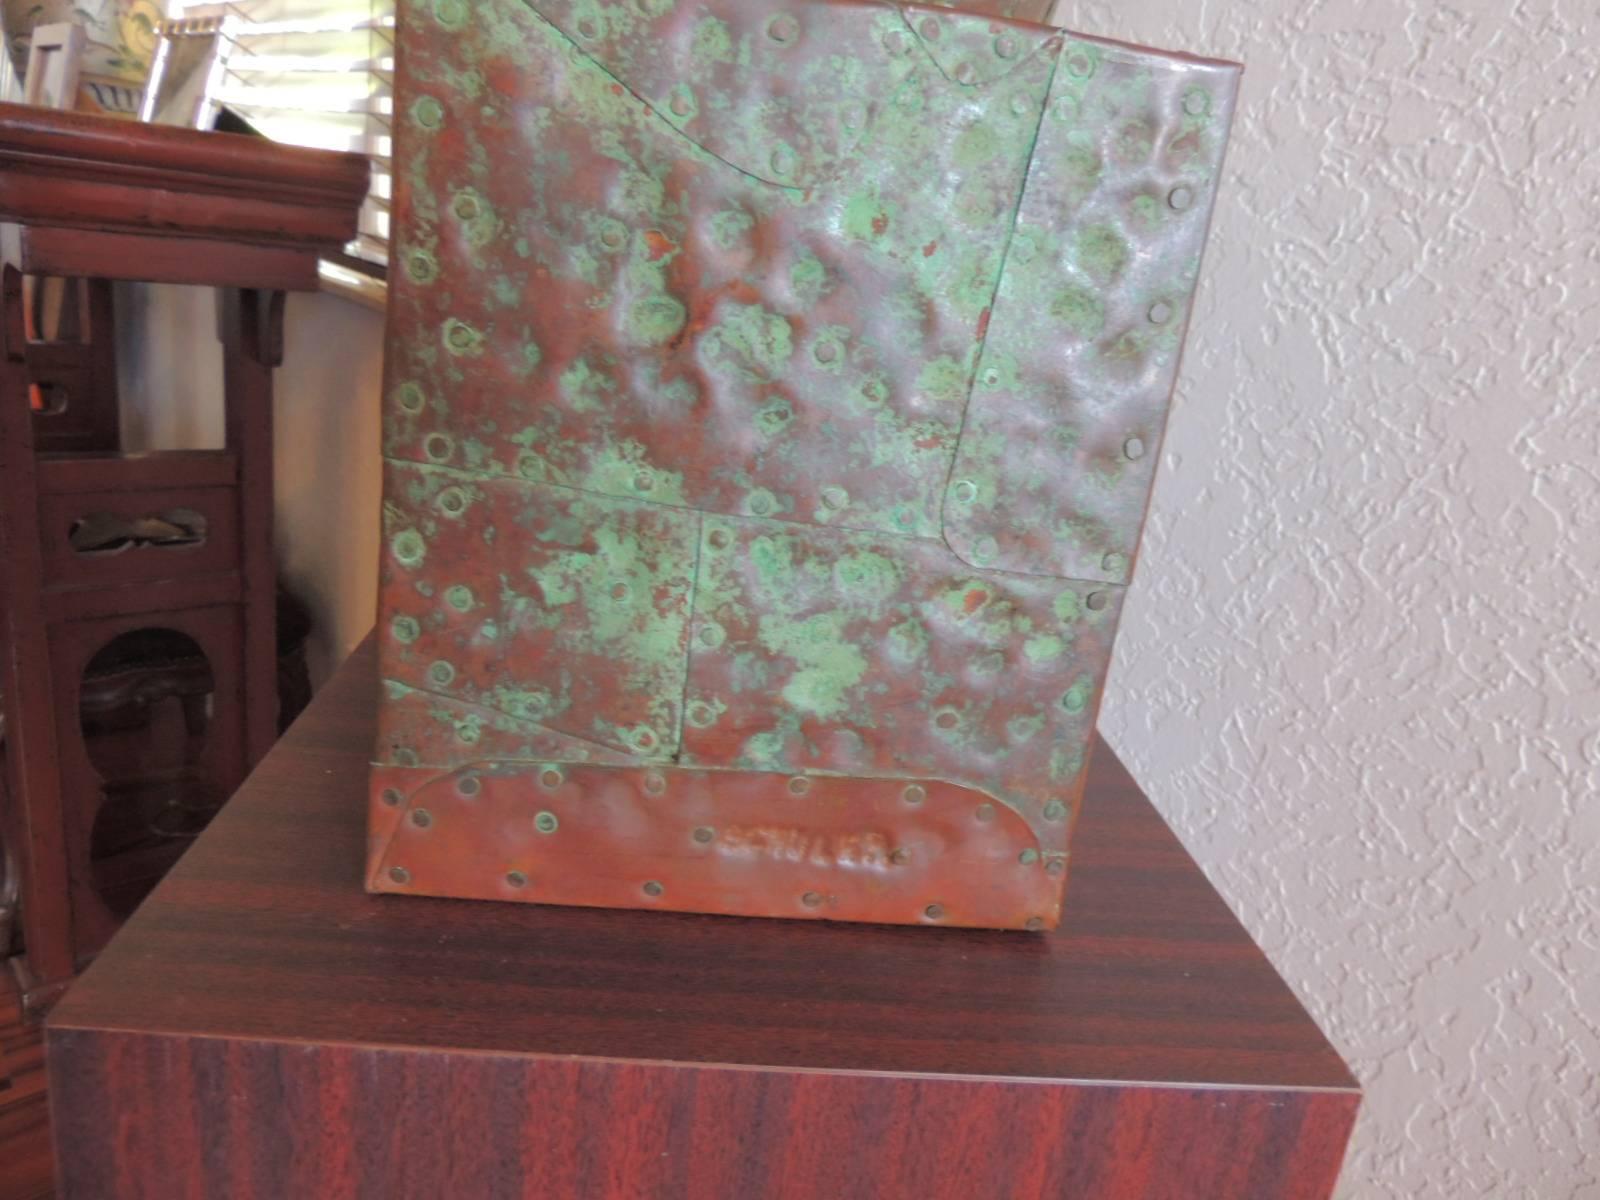 Cooper on redwood sculpture by American Sculptor Melvin A. Schuler on mica pedestal.
A copper over redwood sculpture by artist Melvin Schuler (American, born 1924), circa 1980s. This Abstract sculpture features plates of copper hammered over a